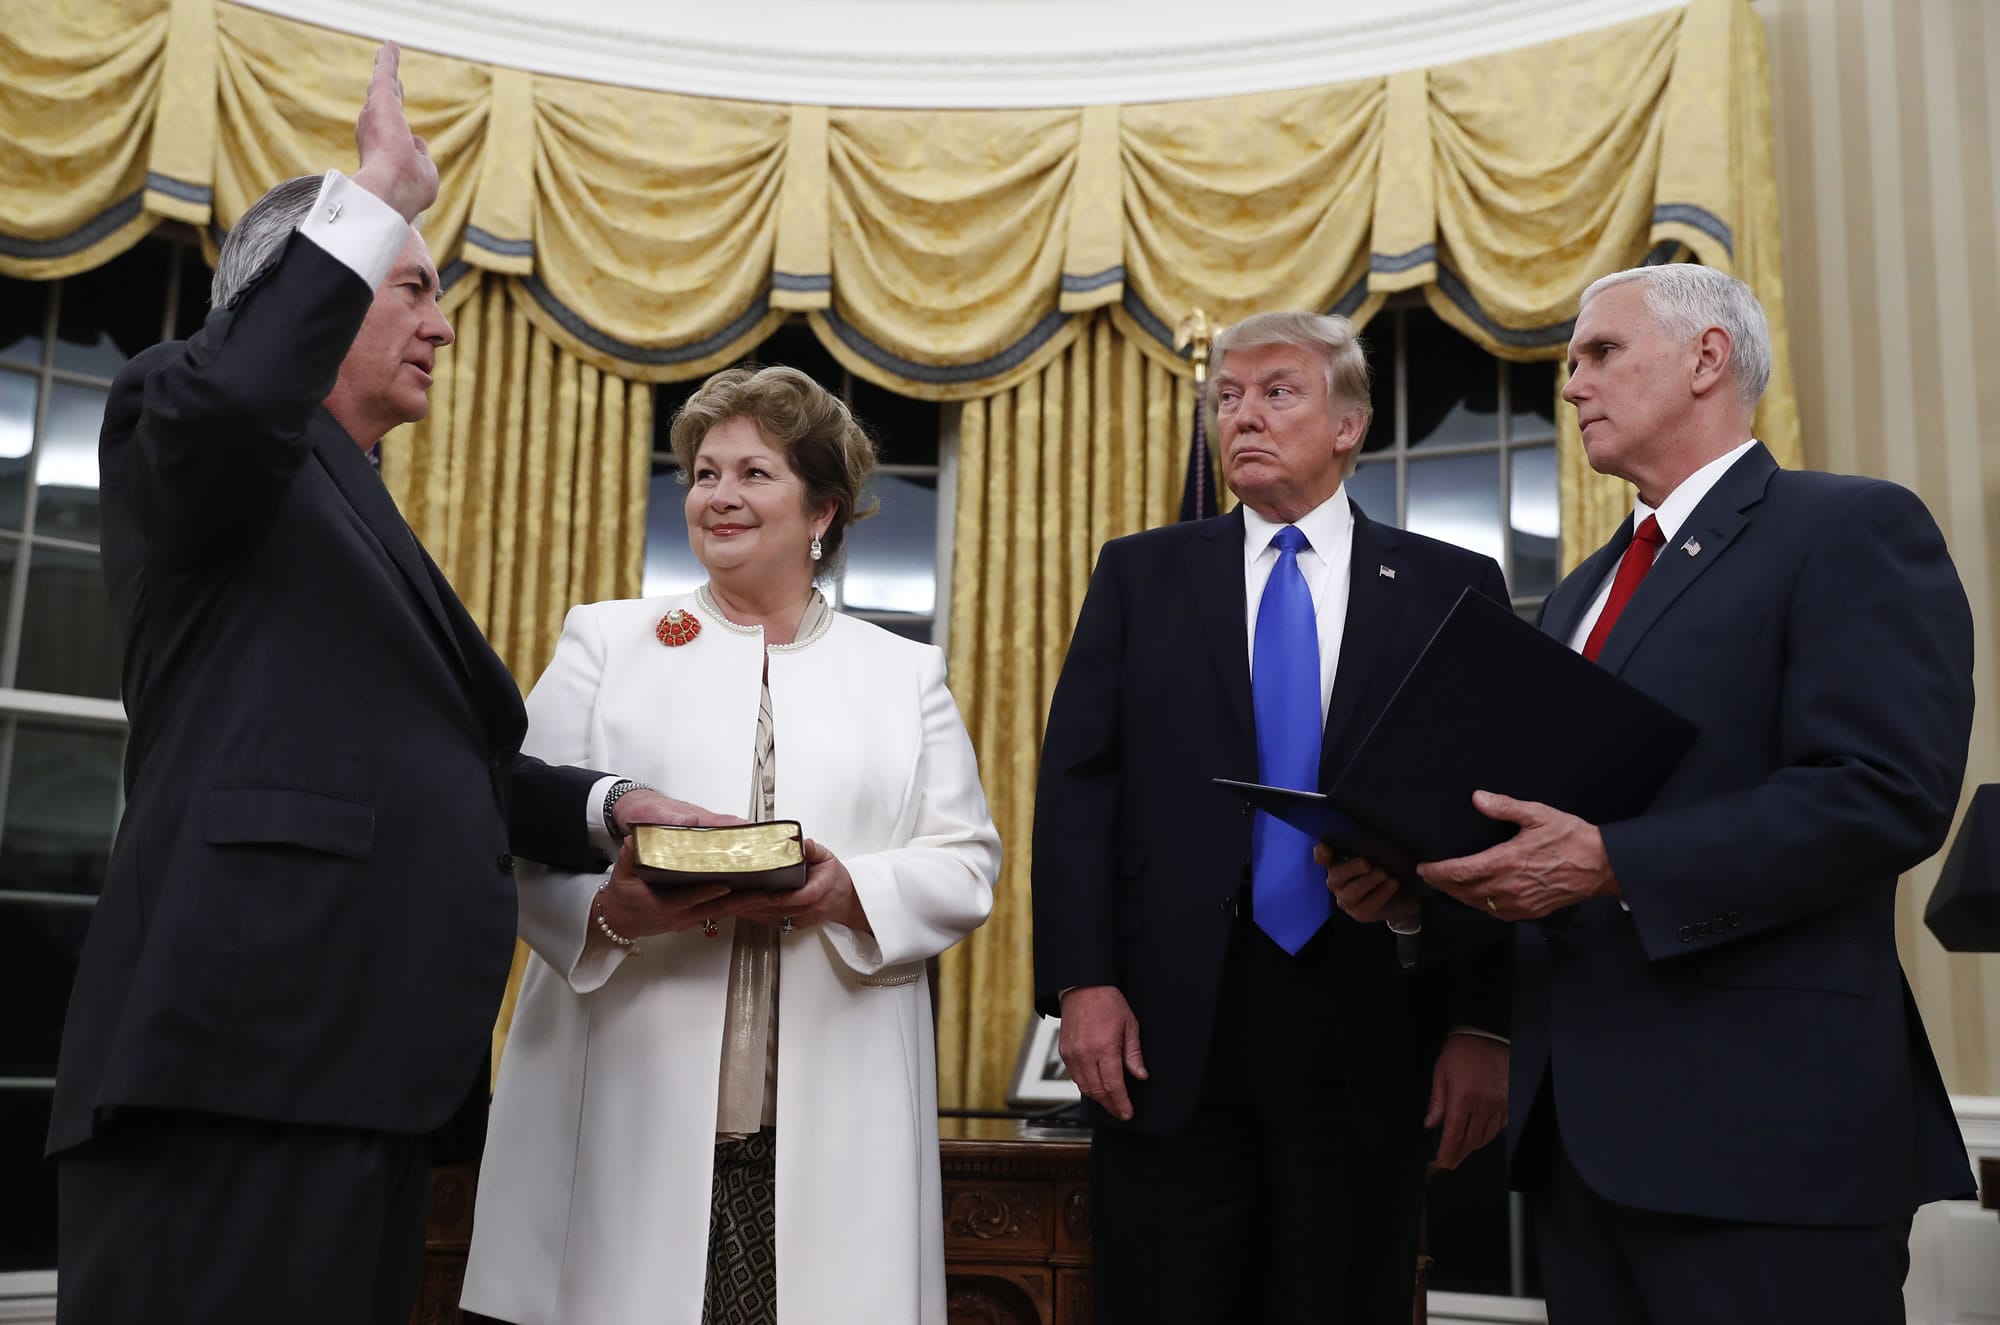 President Donald Trump watches as Vice President Mike Pence swears in Rex Tillerson as Secretary of State in the Oval Office of the White House in Washington, Wednesday, Feb. 1, 2017. Holding the Bible is Tillerson's wife Renda St. Clair.